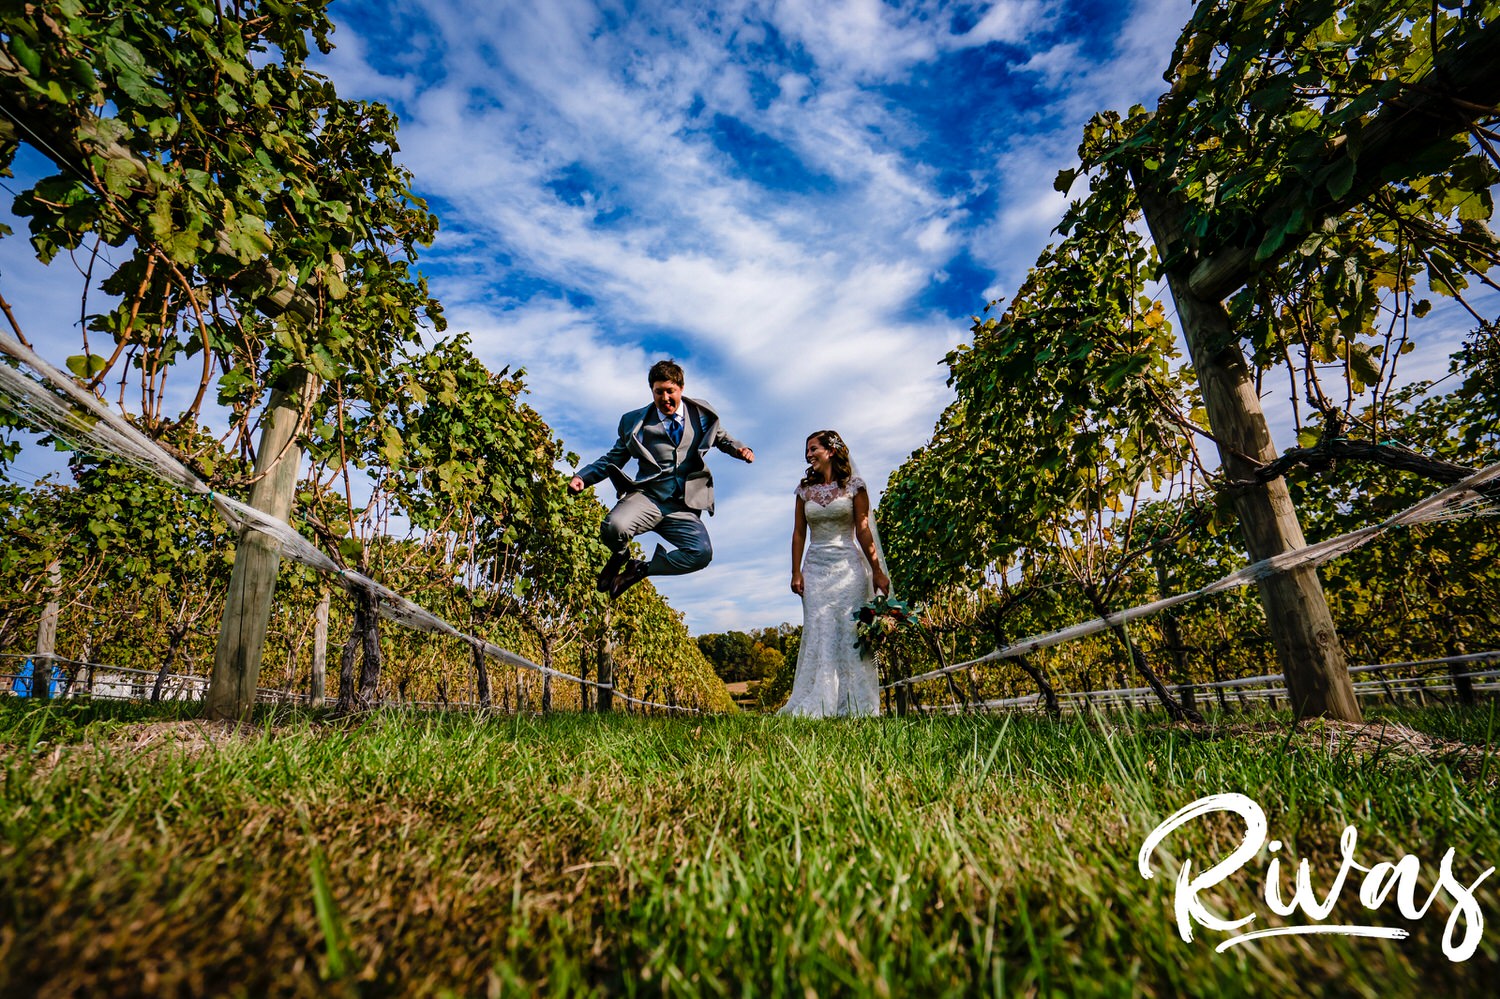 A candid picture of a groom jumping up and clicking his heels together in the middle of a vineyard as his bride watches and laughs on their fall afternoon wedding day. 